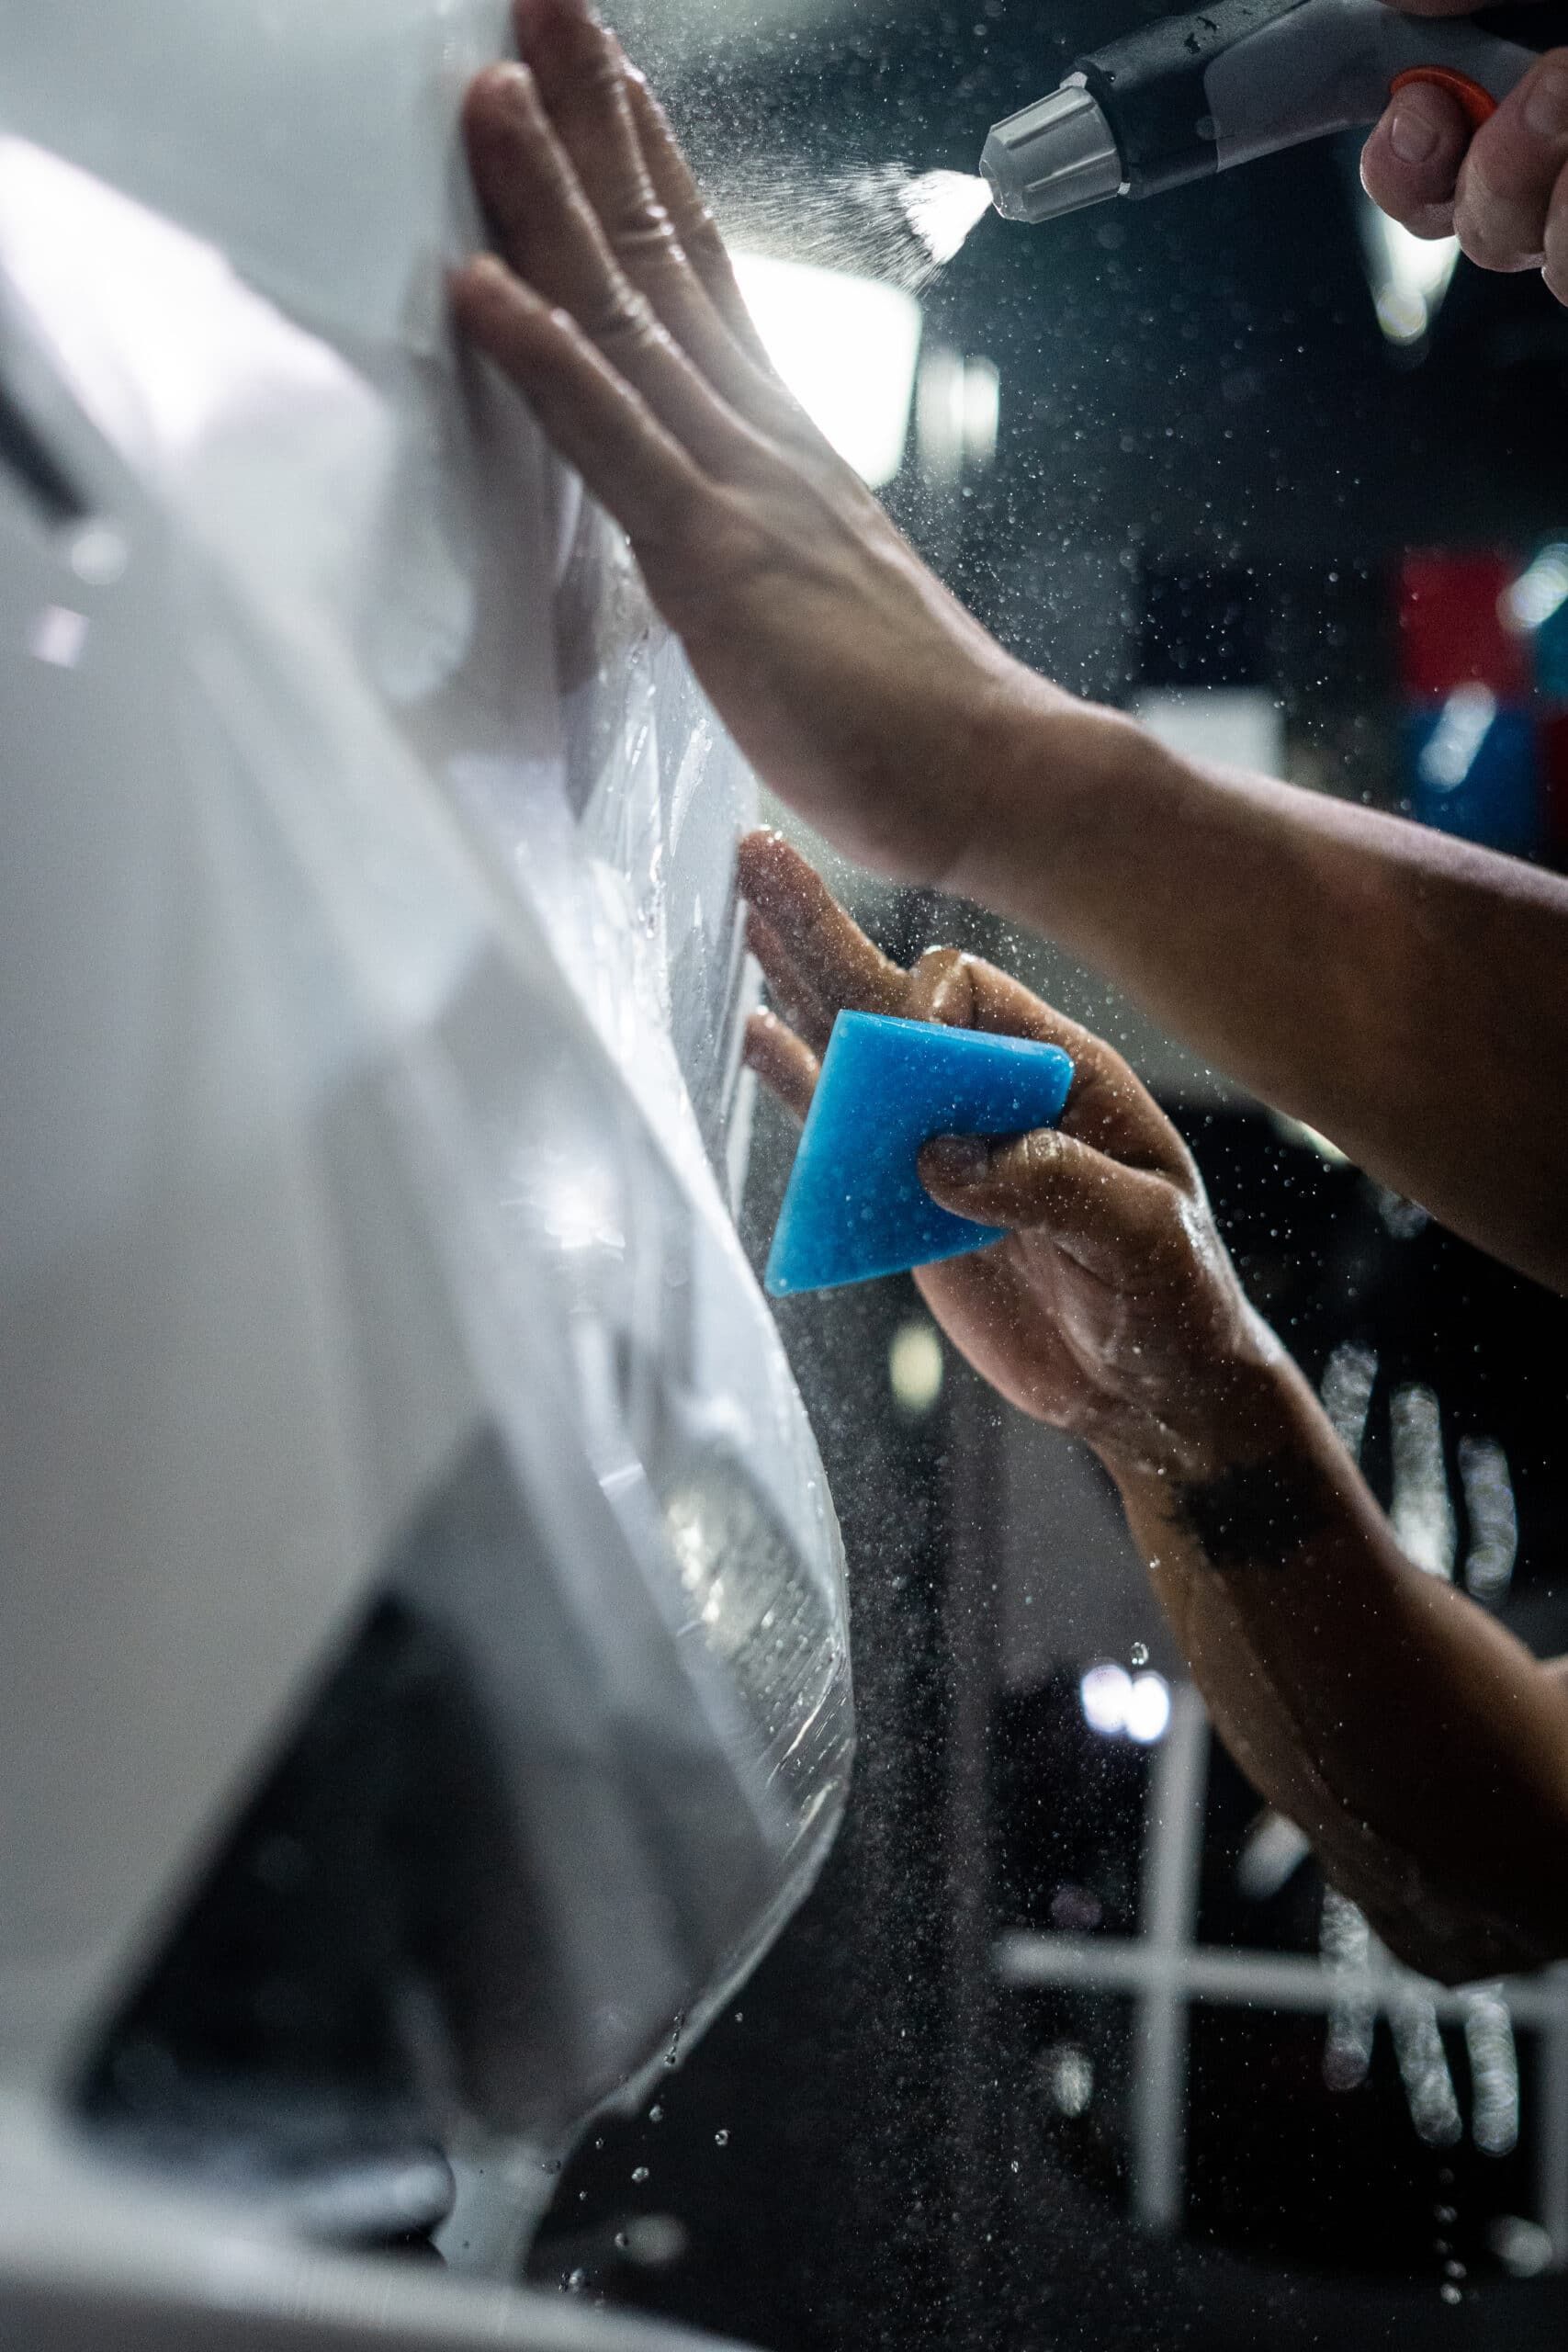 A person is cleaning a car with a blue sponge.